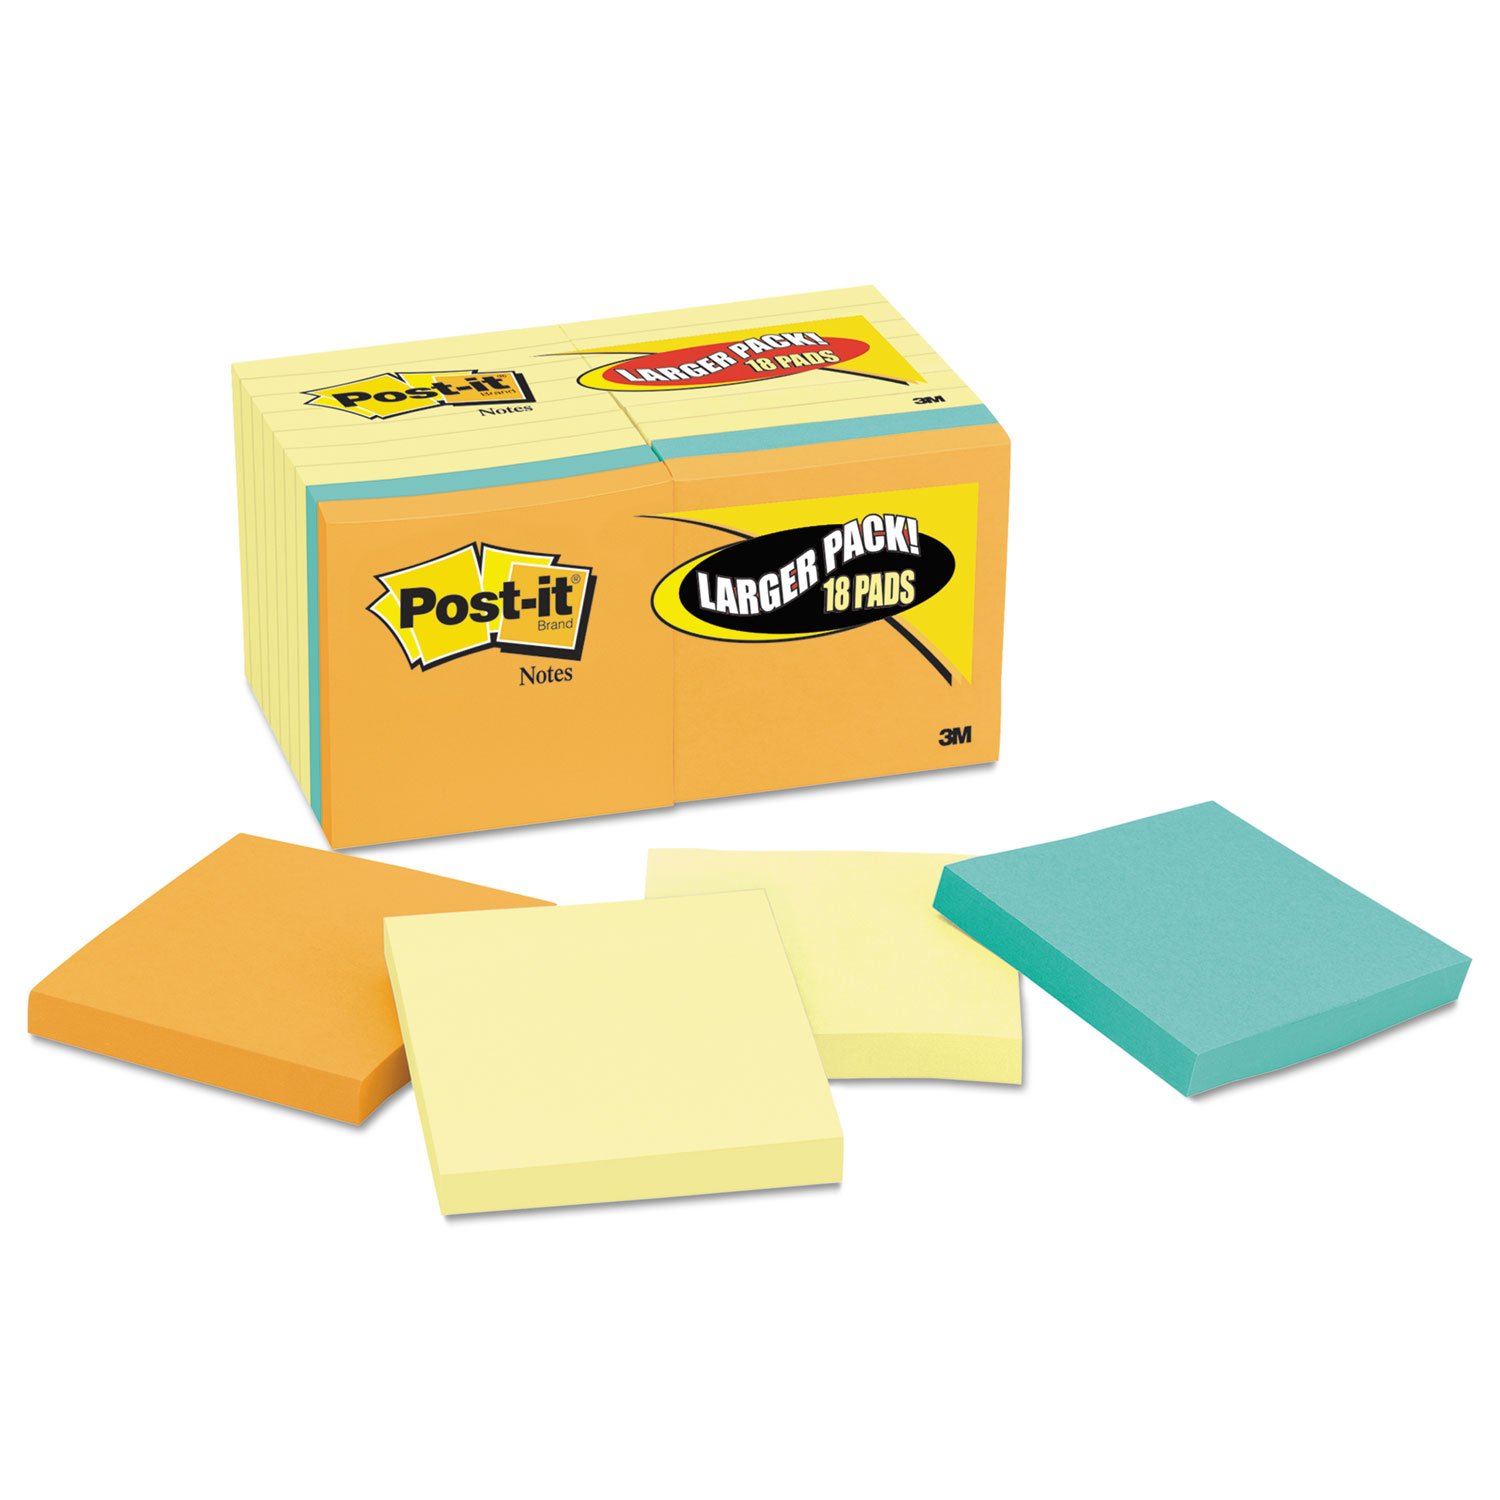 Post-it Notes MMM654144B Original Pads Value Pack, 3 x 3, Canary Yellow/Cape Town, 100-Sheet, 18 Pads